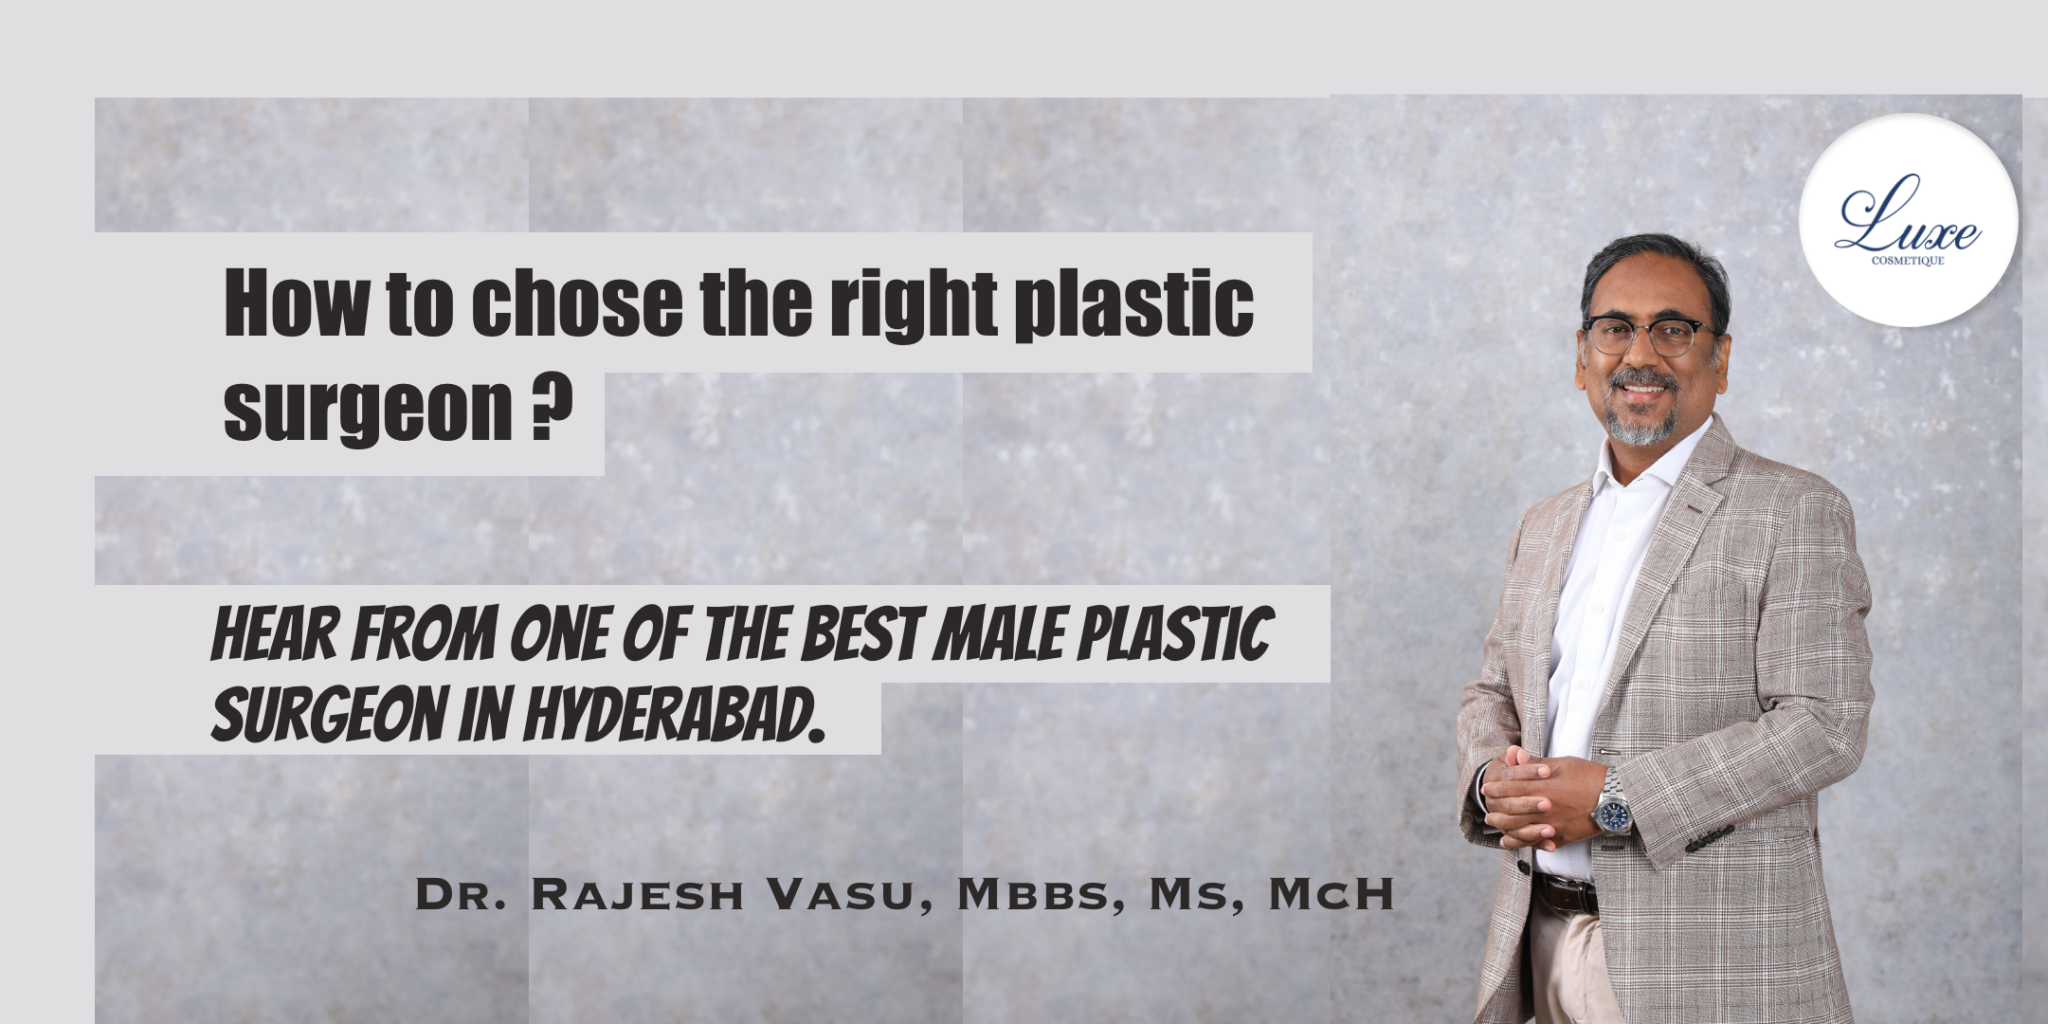 How to chose the right plastic surgeon. Hear from one of the best male plastic surgeon in Hyderabad.